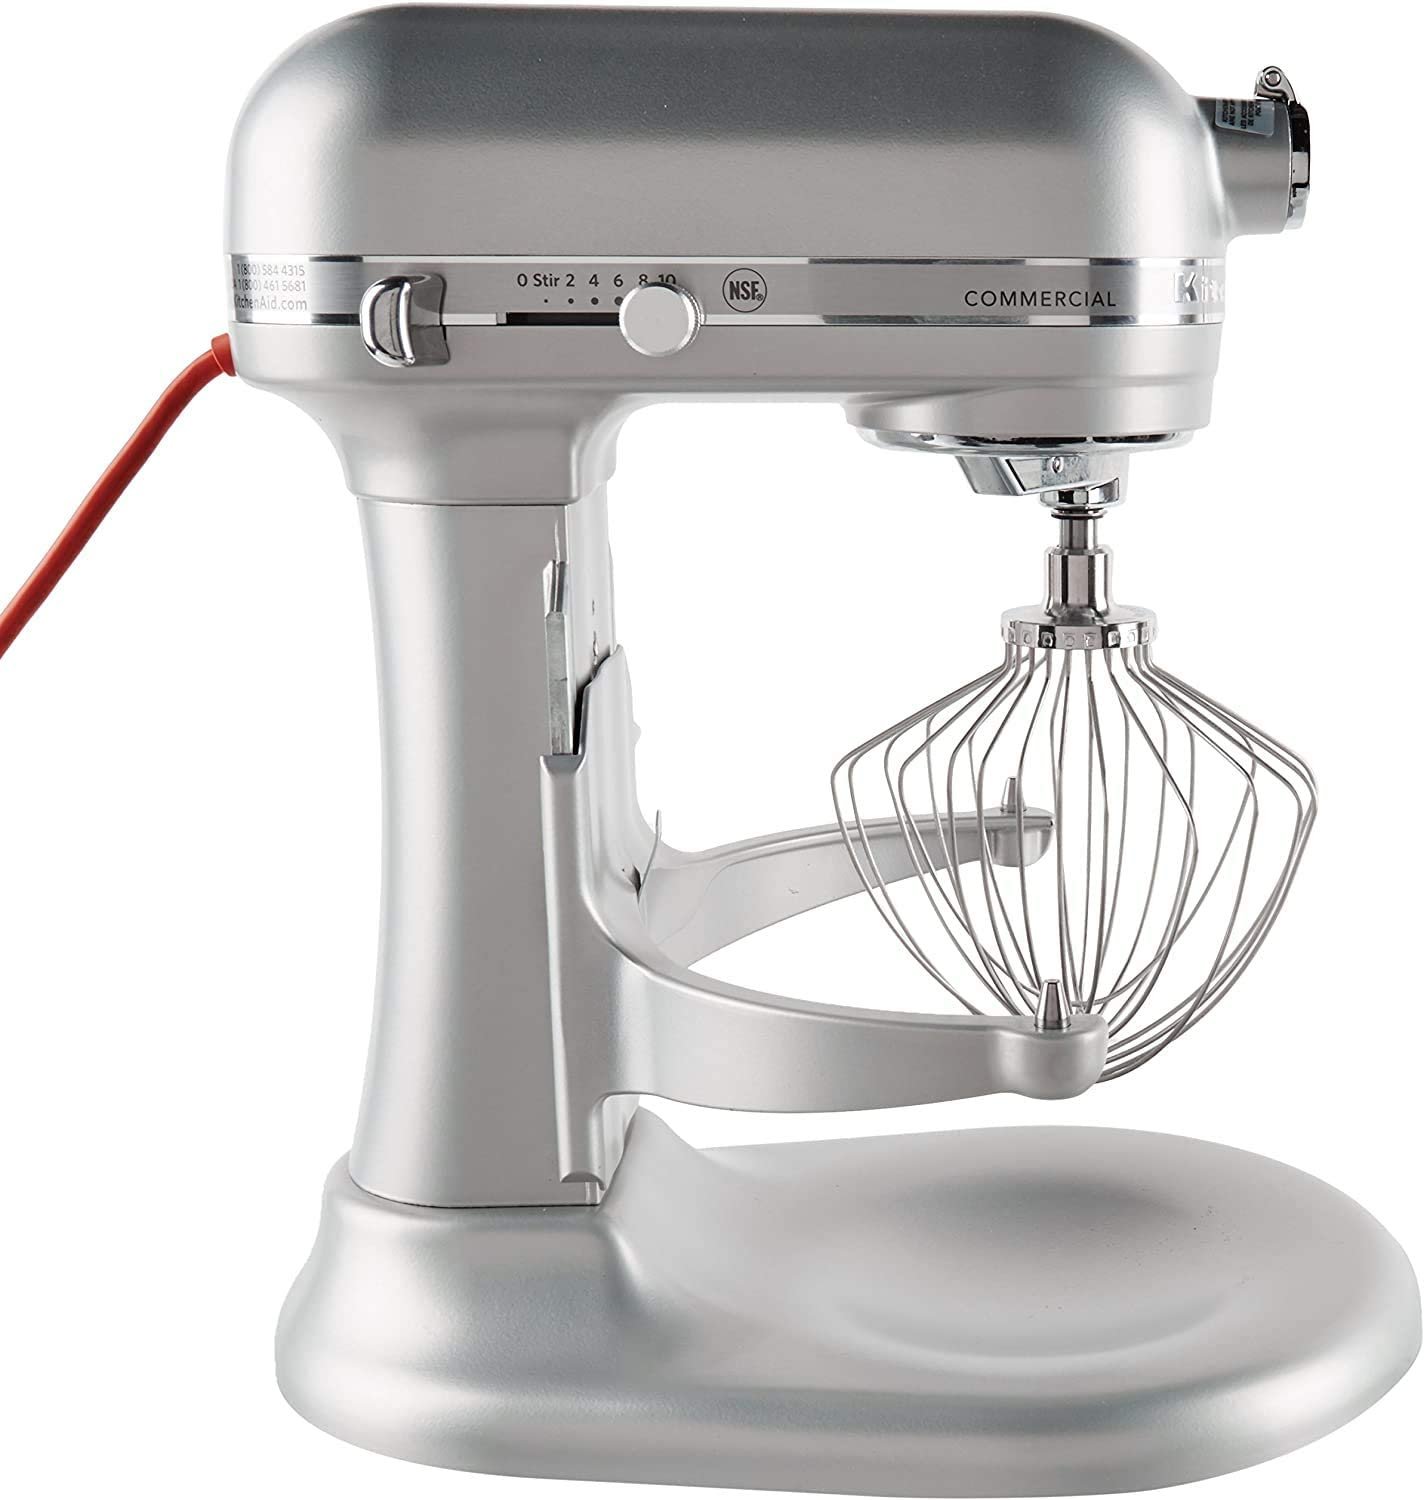 KitchenAid NSF Certified Commercial Series 8 Quart Bowl Lift Stand Mixer, - image 4 of 8